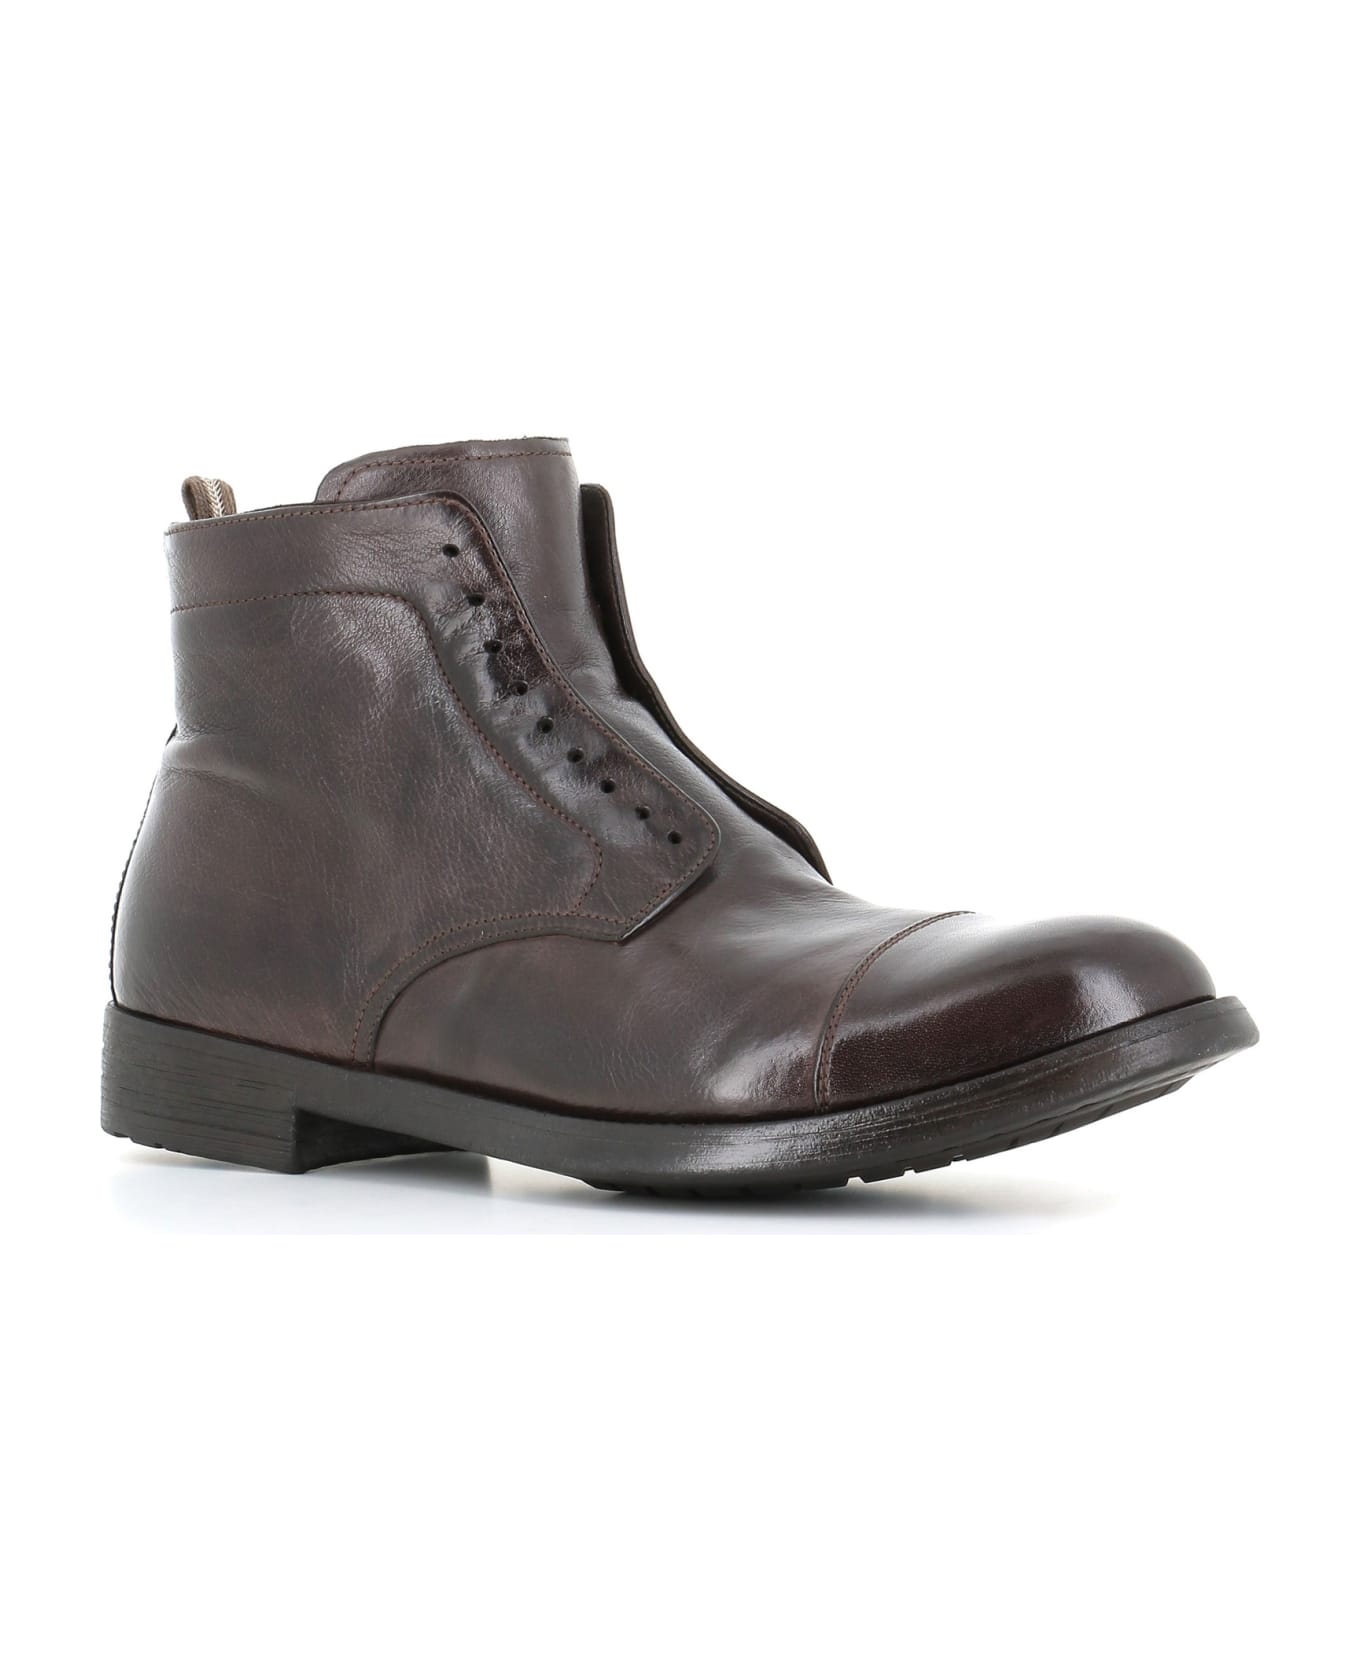 Officine Creative Lace-up Boot Hive/005 - Ebony